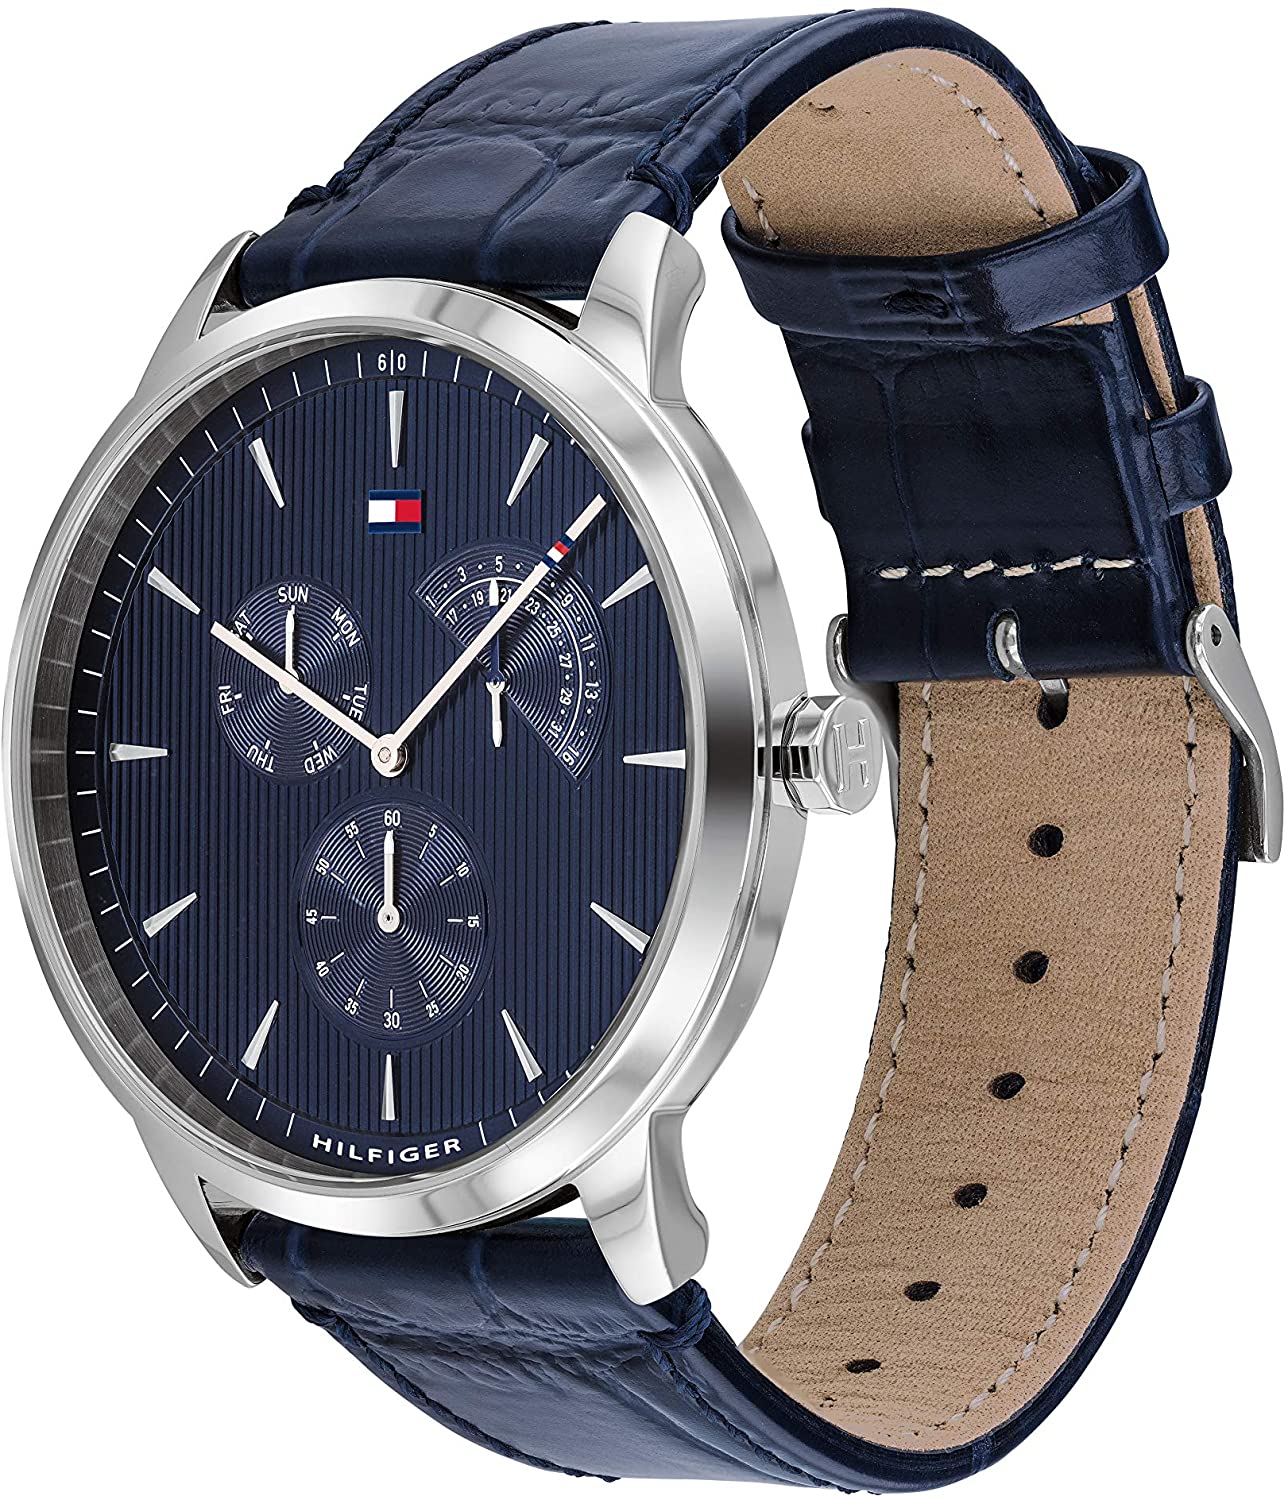 Tommy Hilfiger Men's Stainless Steel Quartz Watch with Leather Crocodile Strap, Blue, 22 (Model: 1710387)